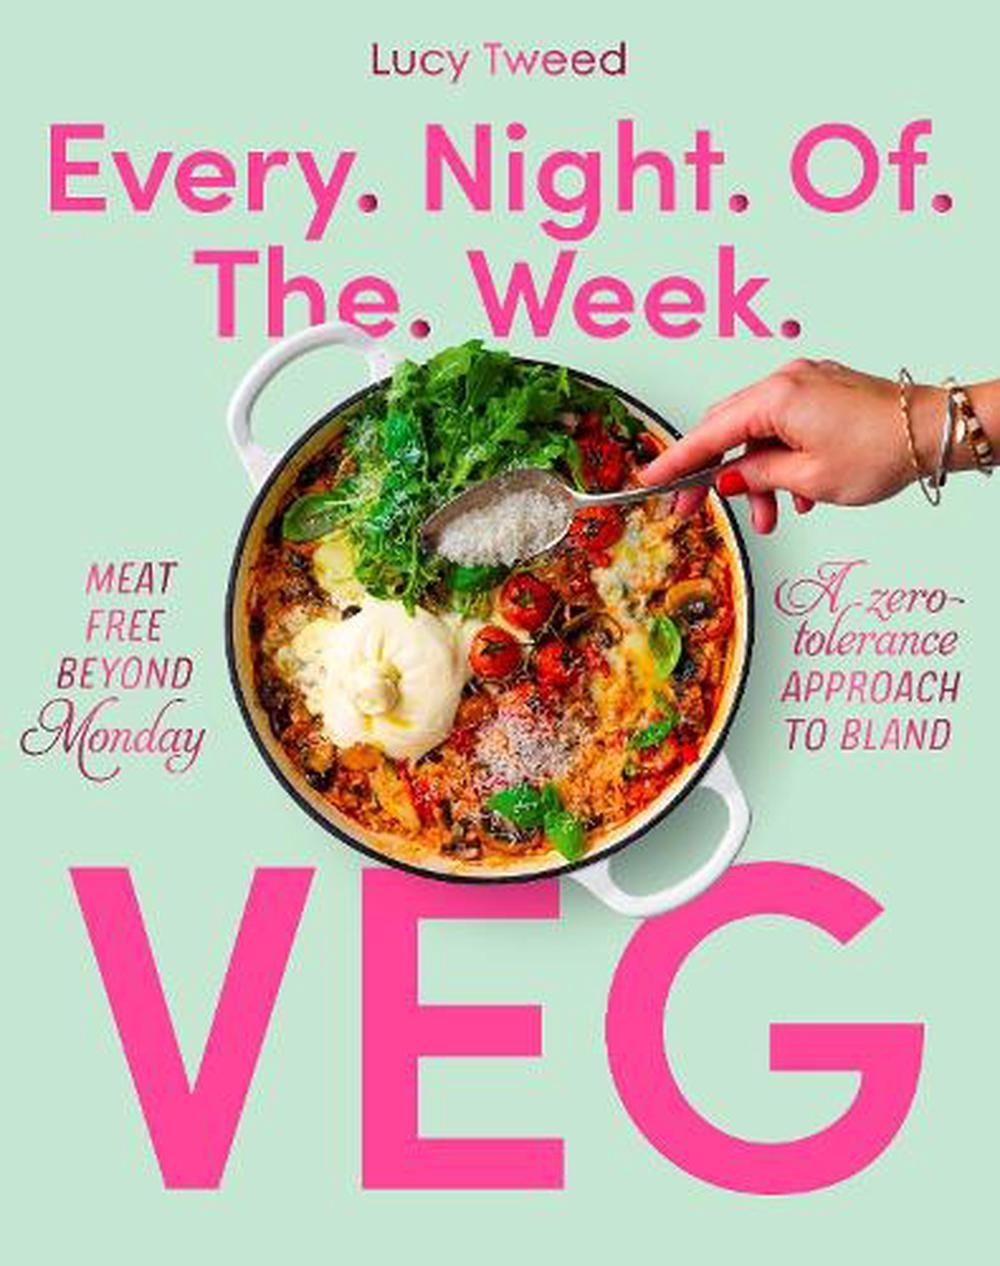 Every night of the week veg : meat-free beyond Monday. A zero-tolerance approach to bland by Lucy Tweed